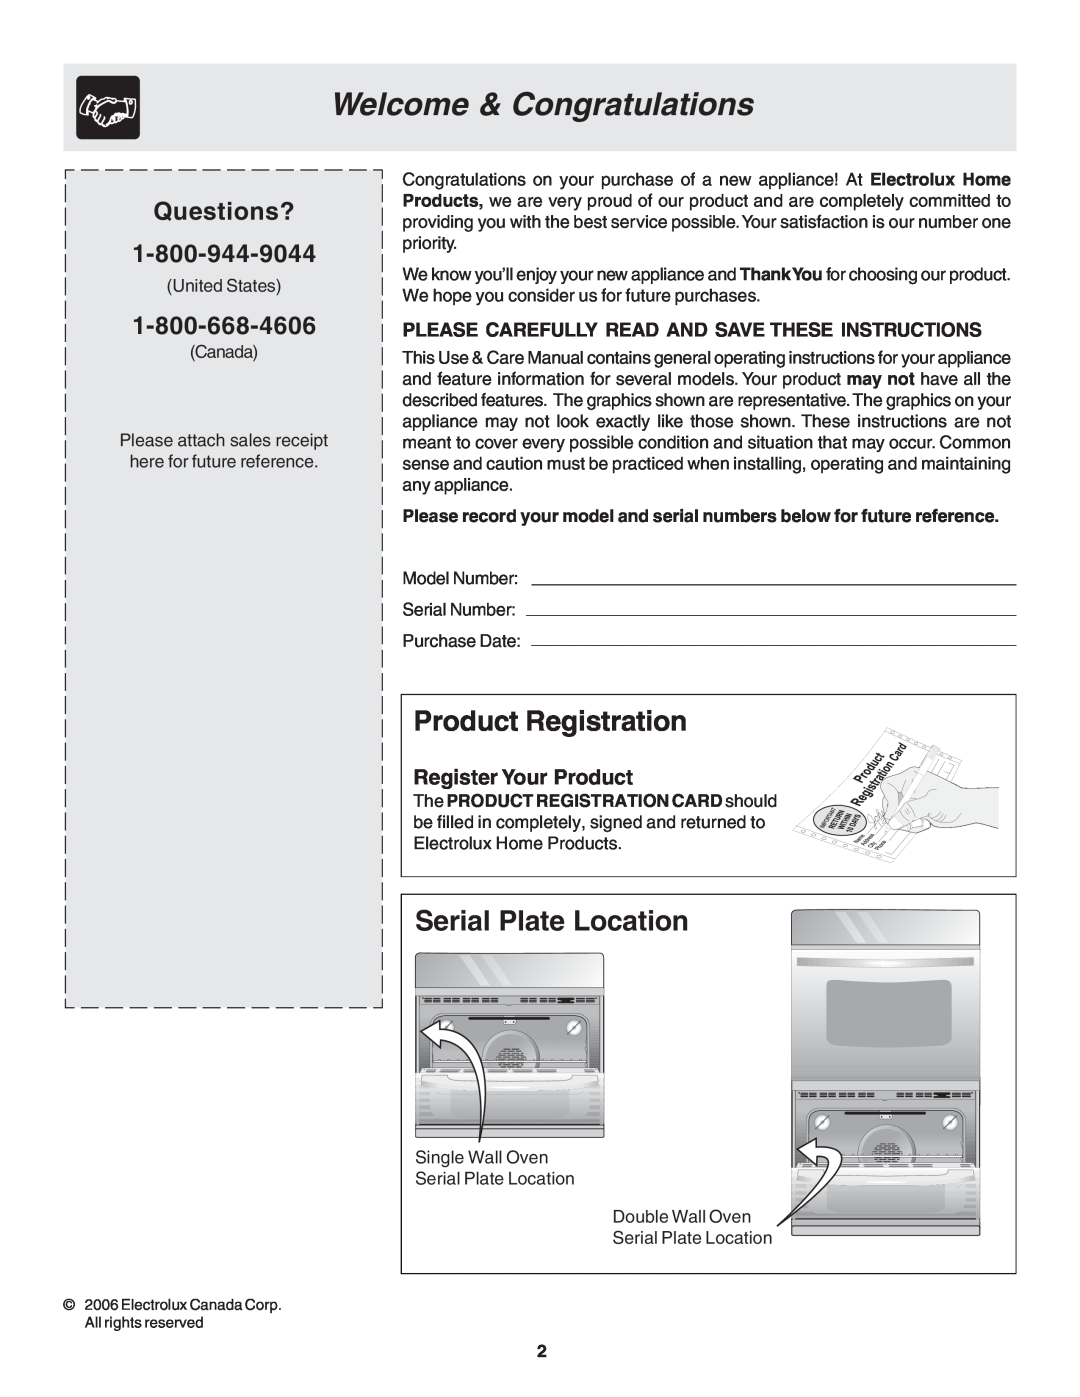 Frigidaire 318205103 manual Welcome & Congratulations, Product Registration, Serial Plate Location, Questions? 